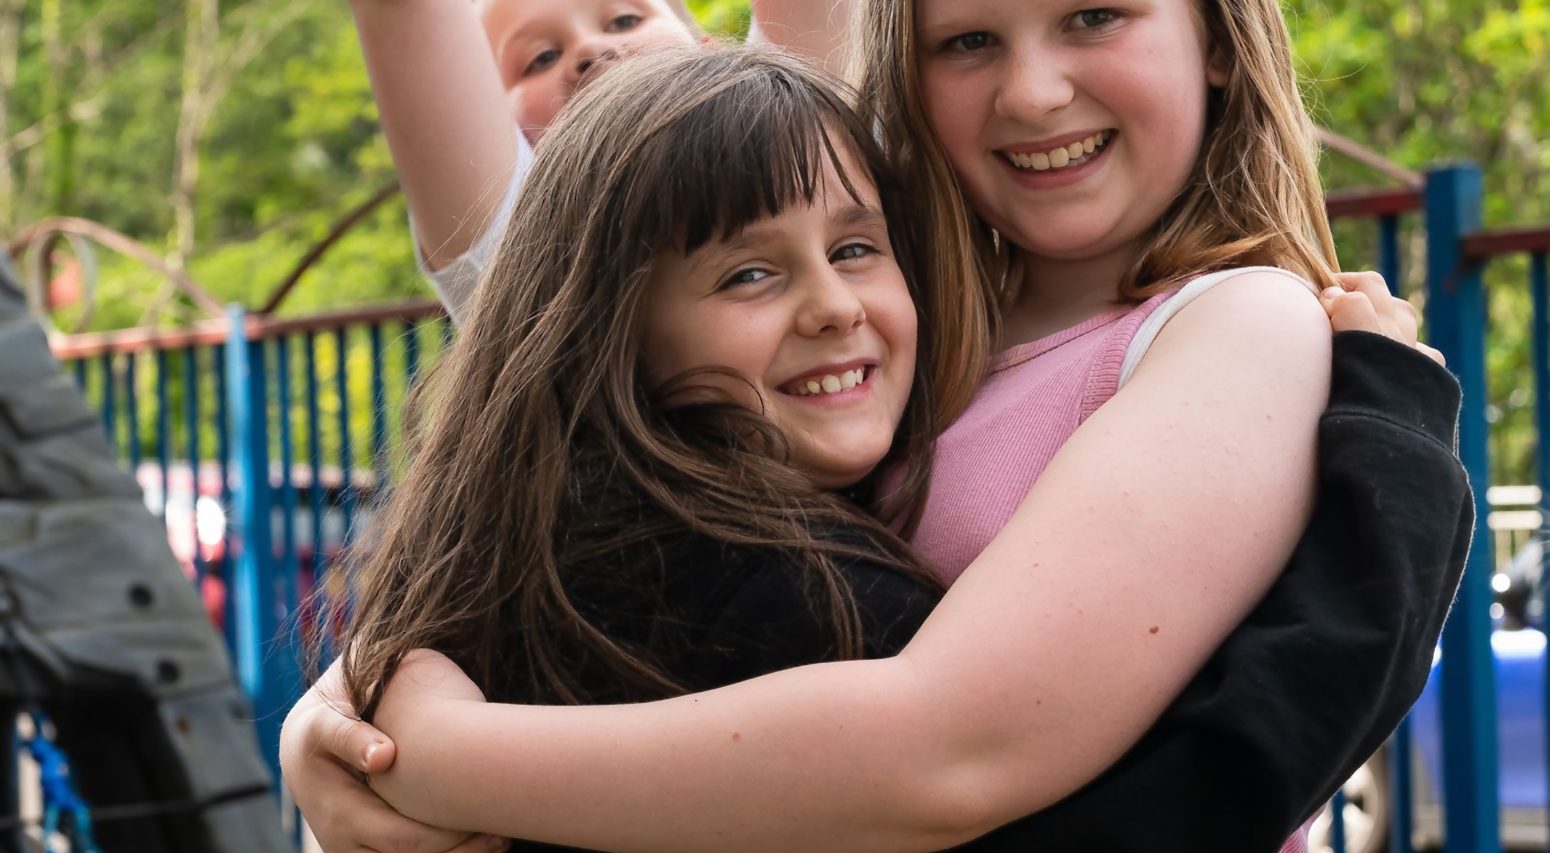 Two young girls hugging, with another child photo bombing in the background